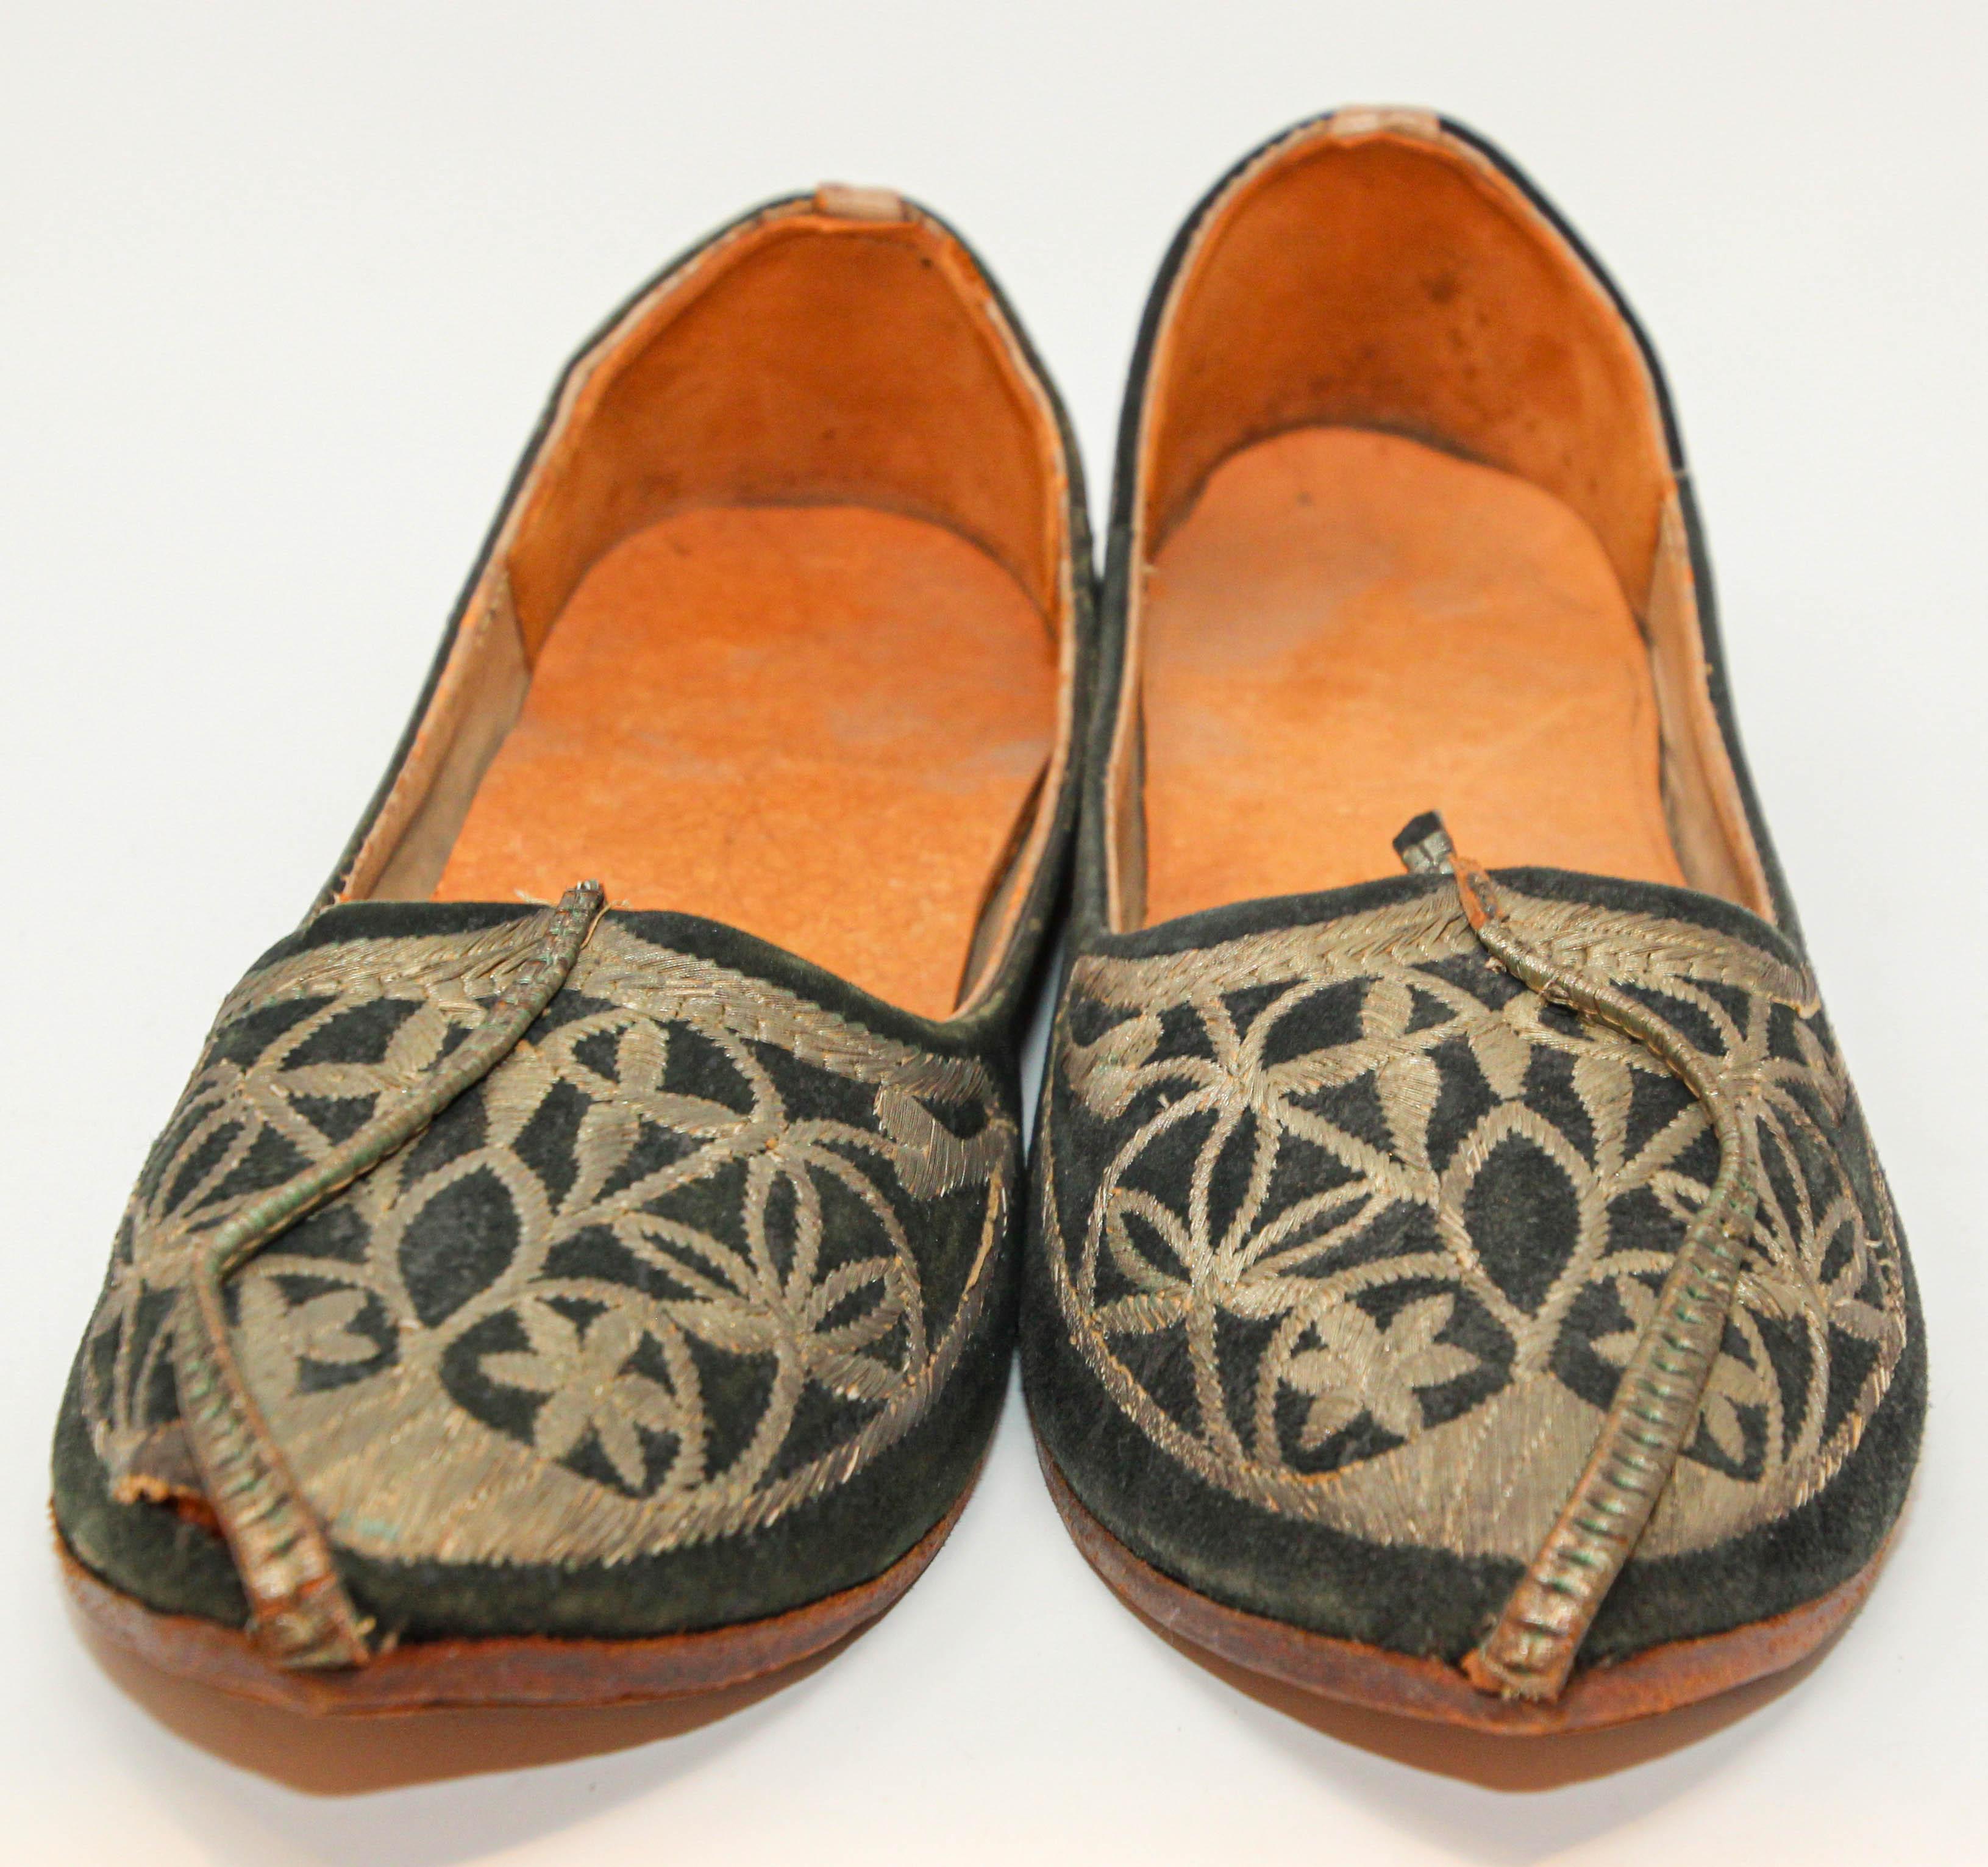 Women's or Men's Moorish Mughal style Curled Toe Black Leather Shoes from Tony Duquette Estate For Sale